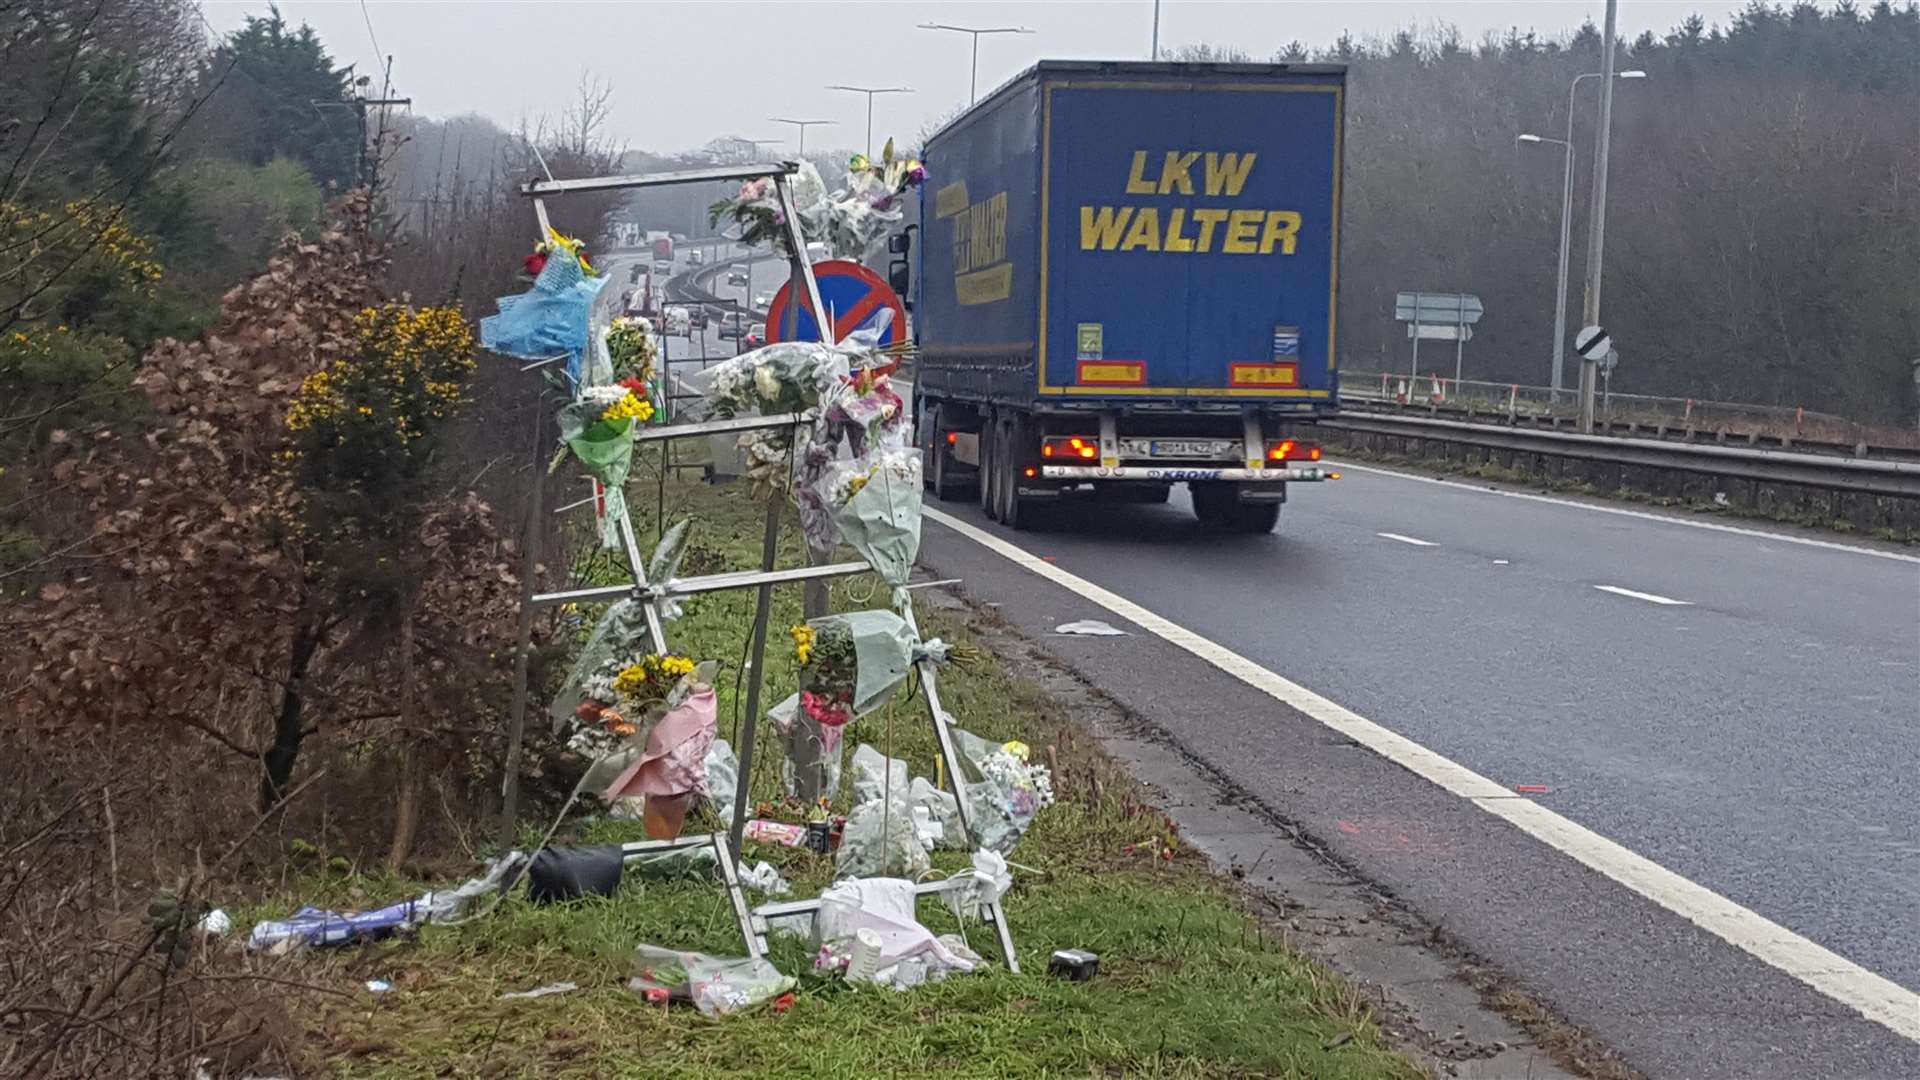 A memorial has been created near the scene of the accident